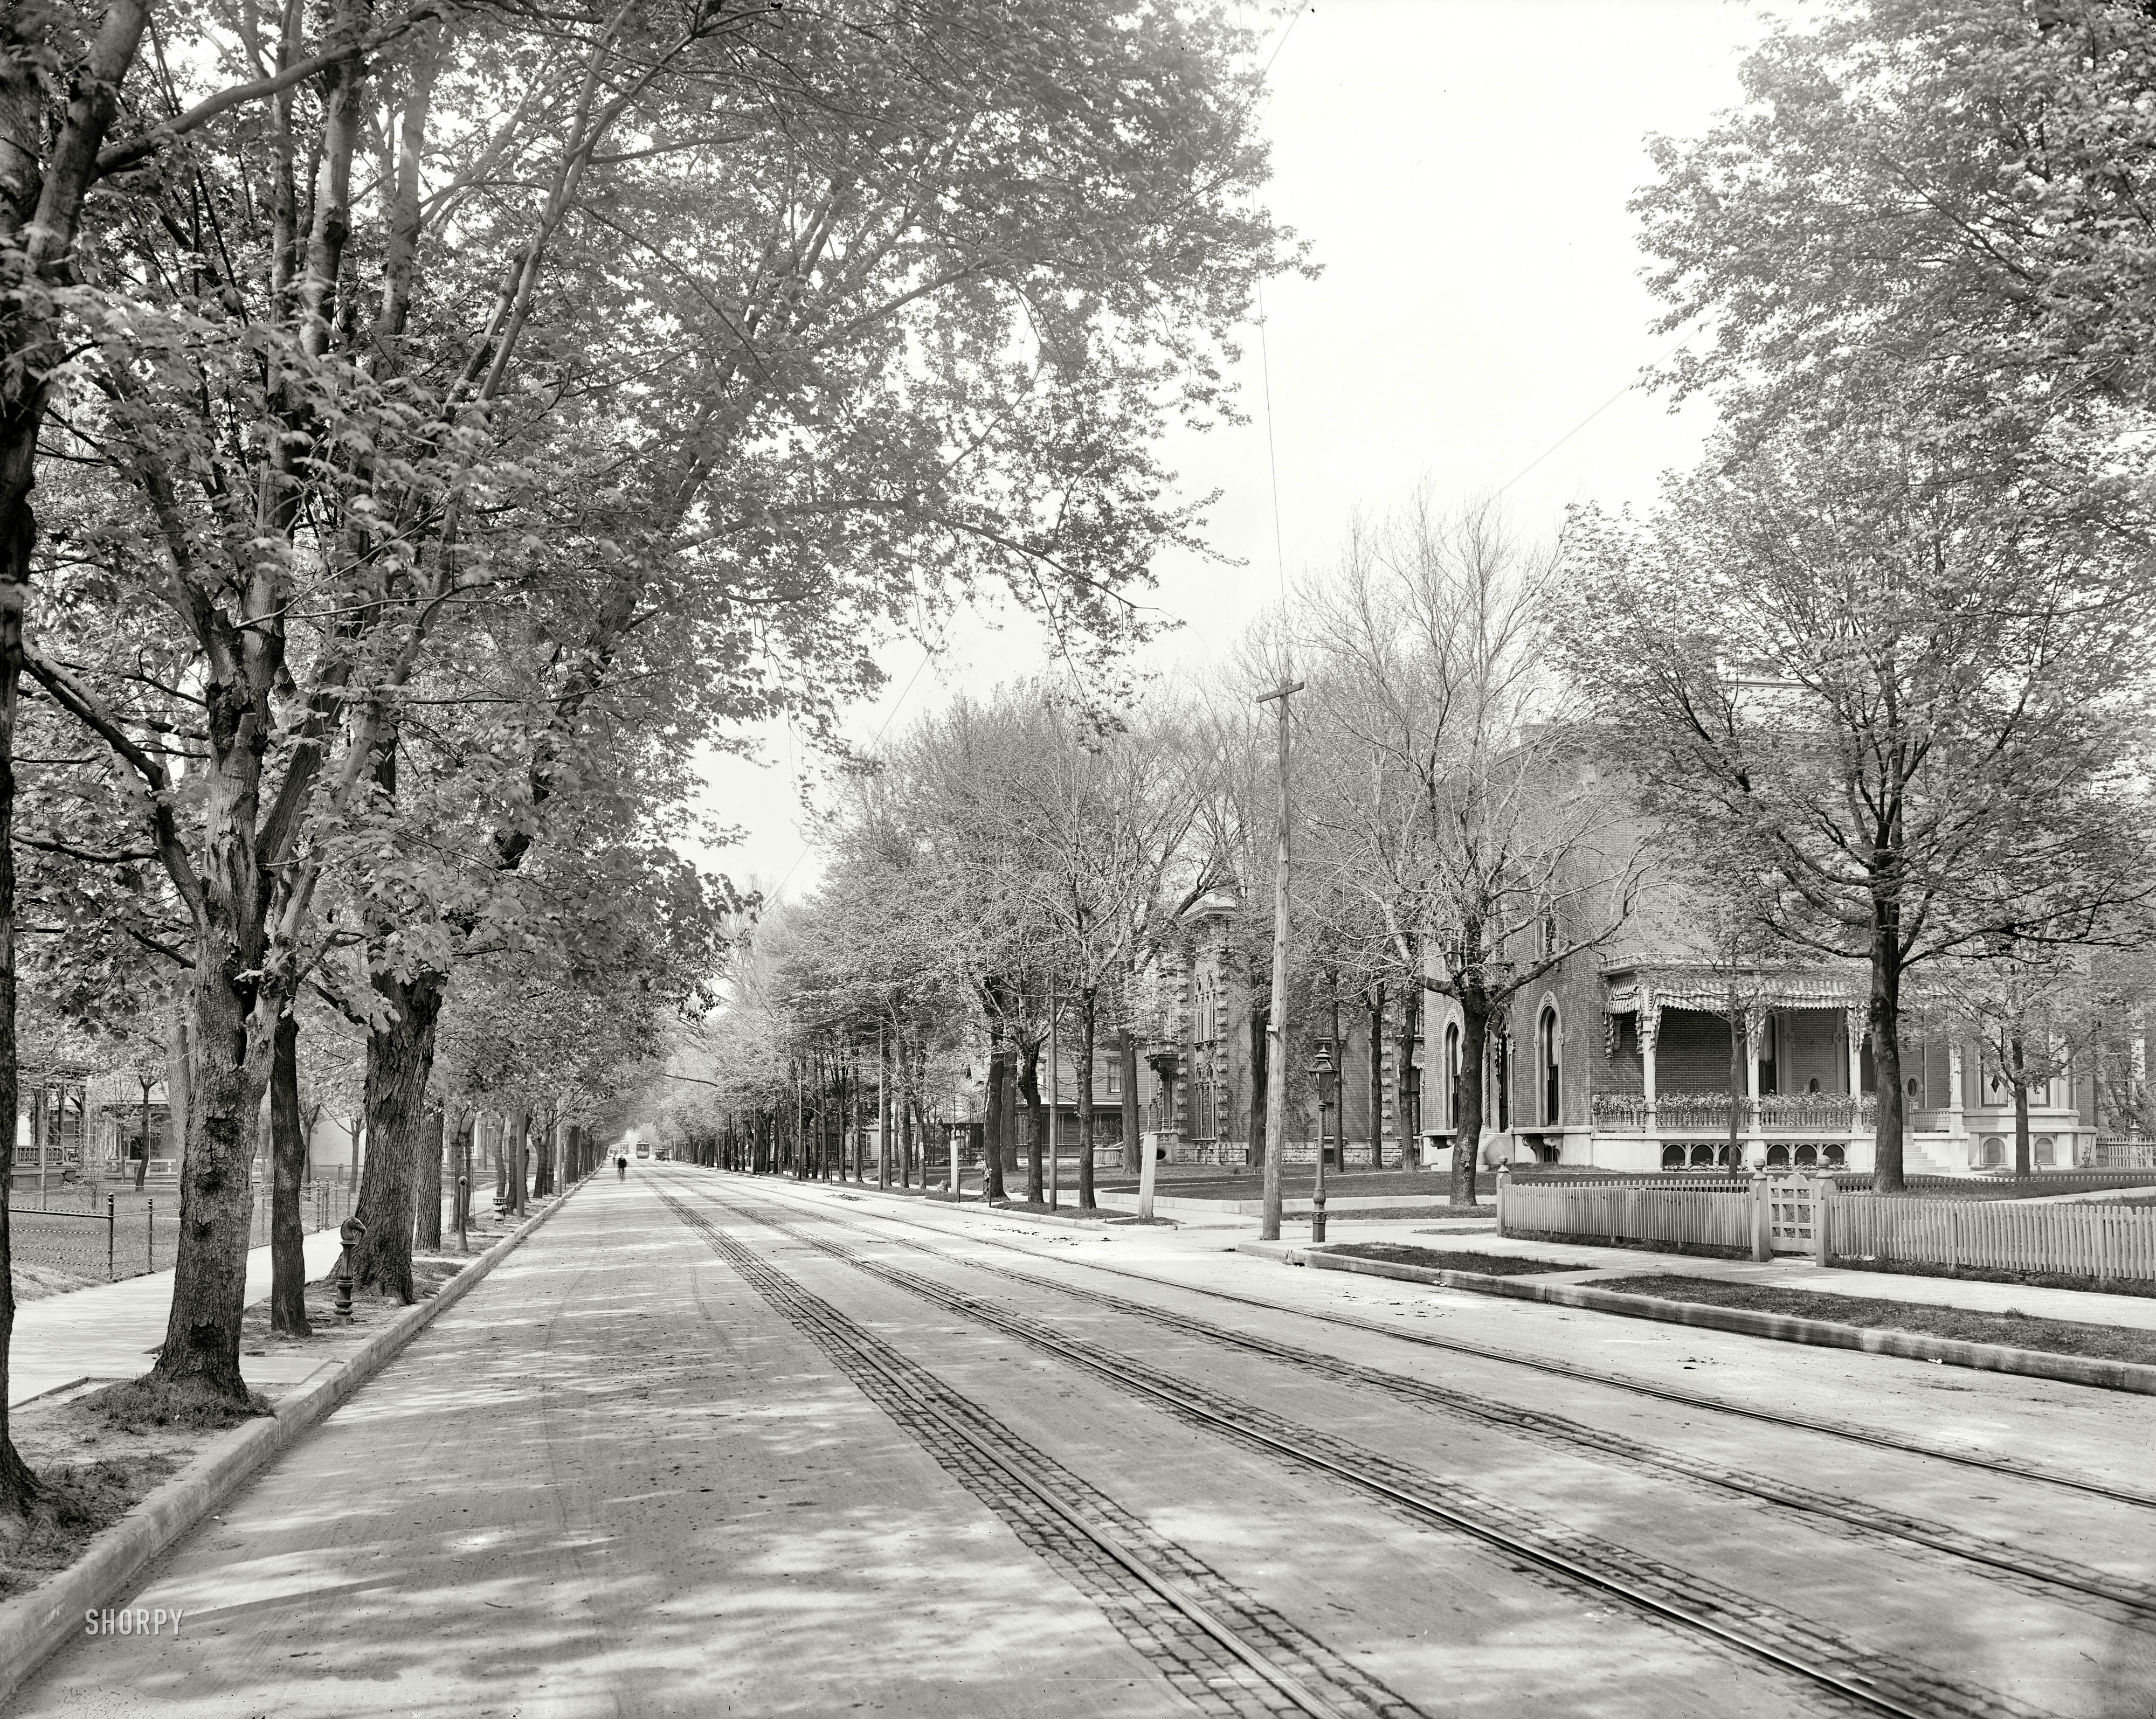 Indianapolis, Indiana, circa 1904. "North Pennsylvania Street." There's not much going on here, which maybe is part of this picture's charm. Lots of hitching posts, though. 8x10 inch glass negative, Detroit Publishing Company. View full size.